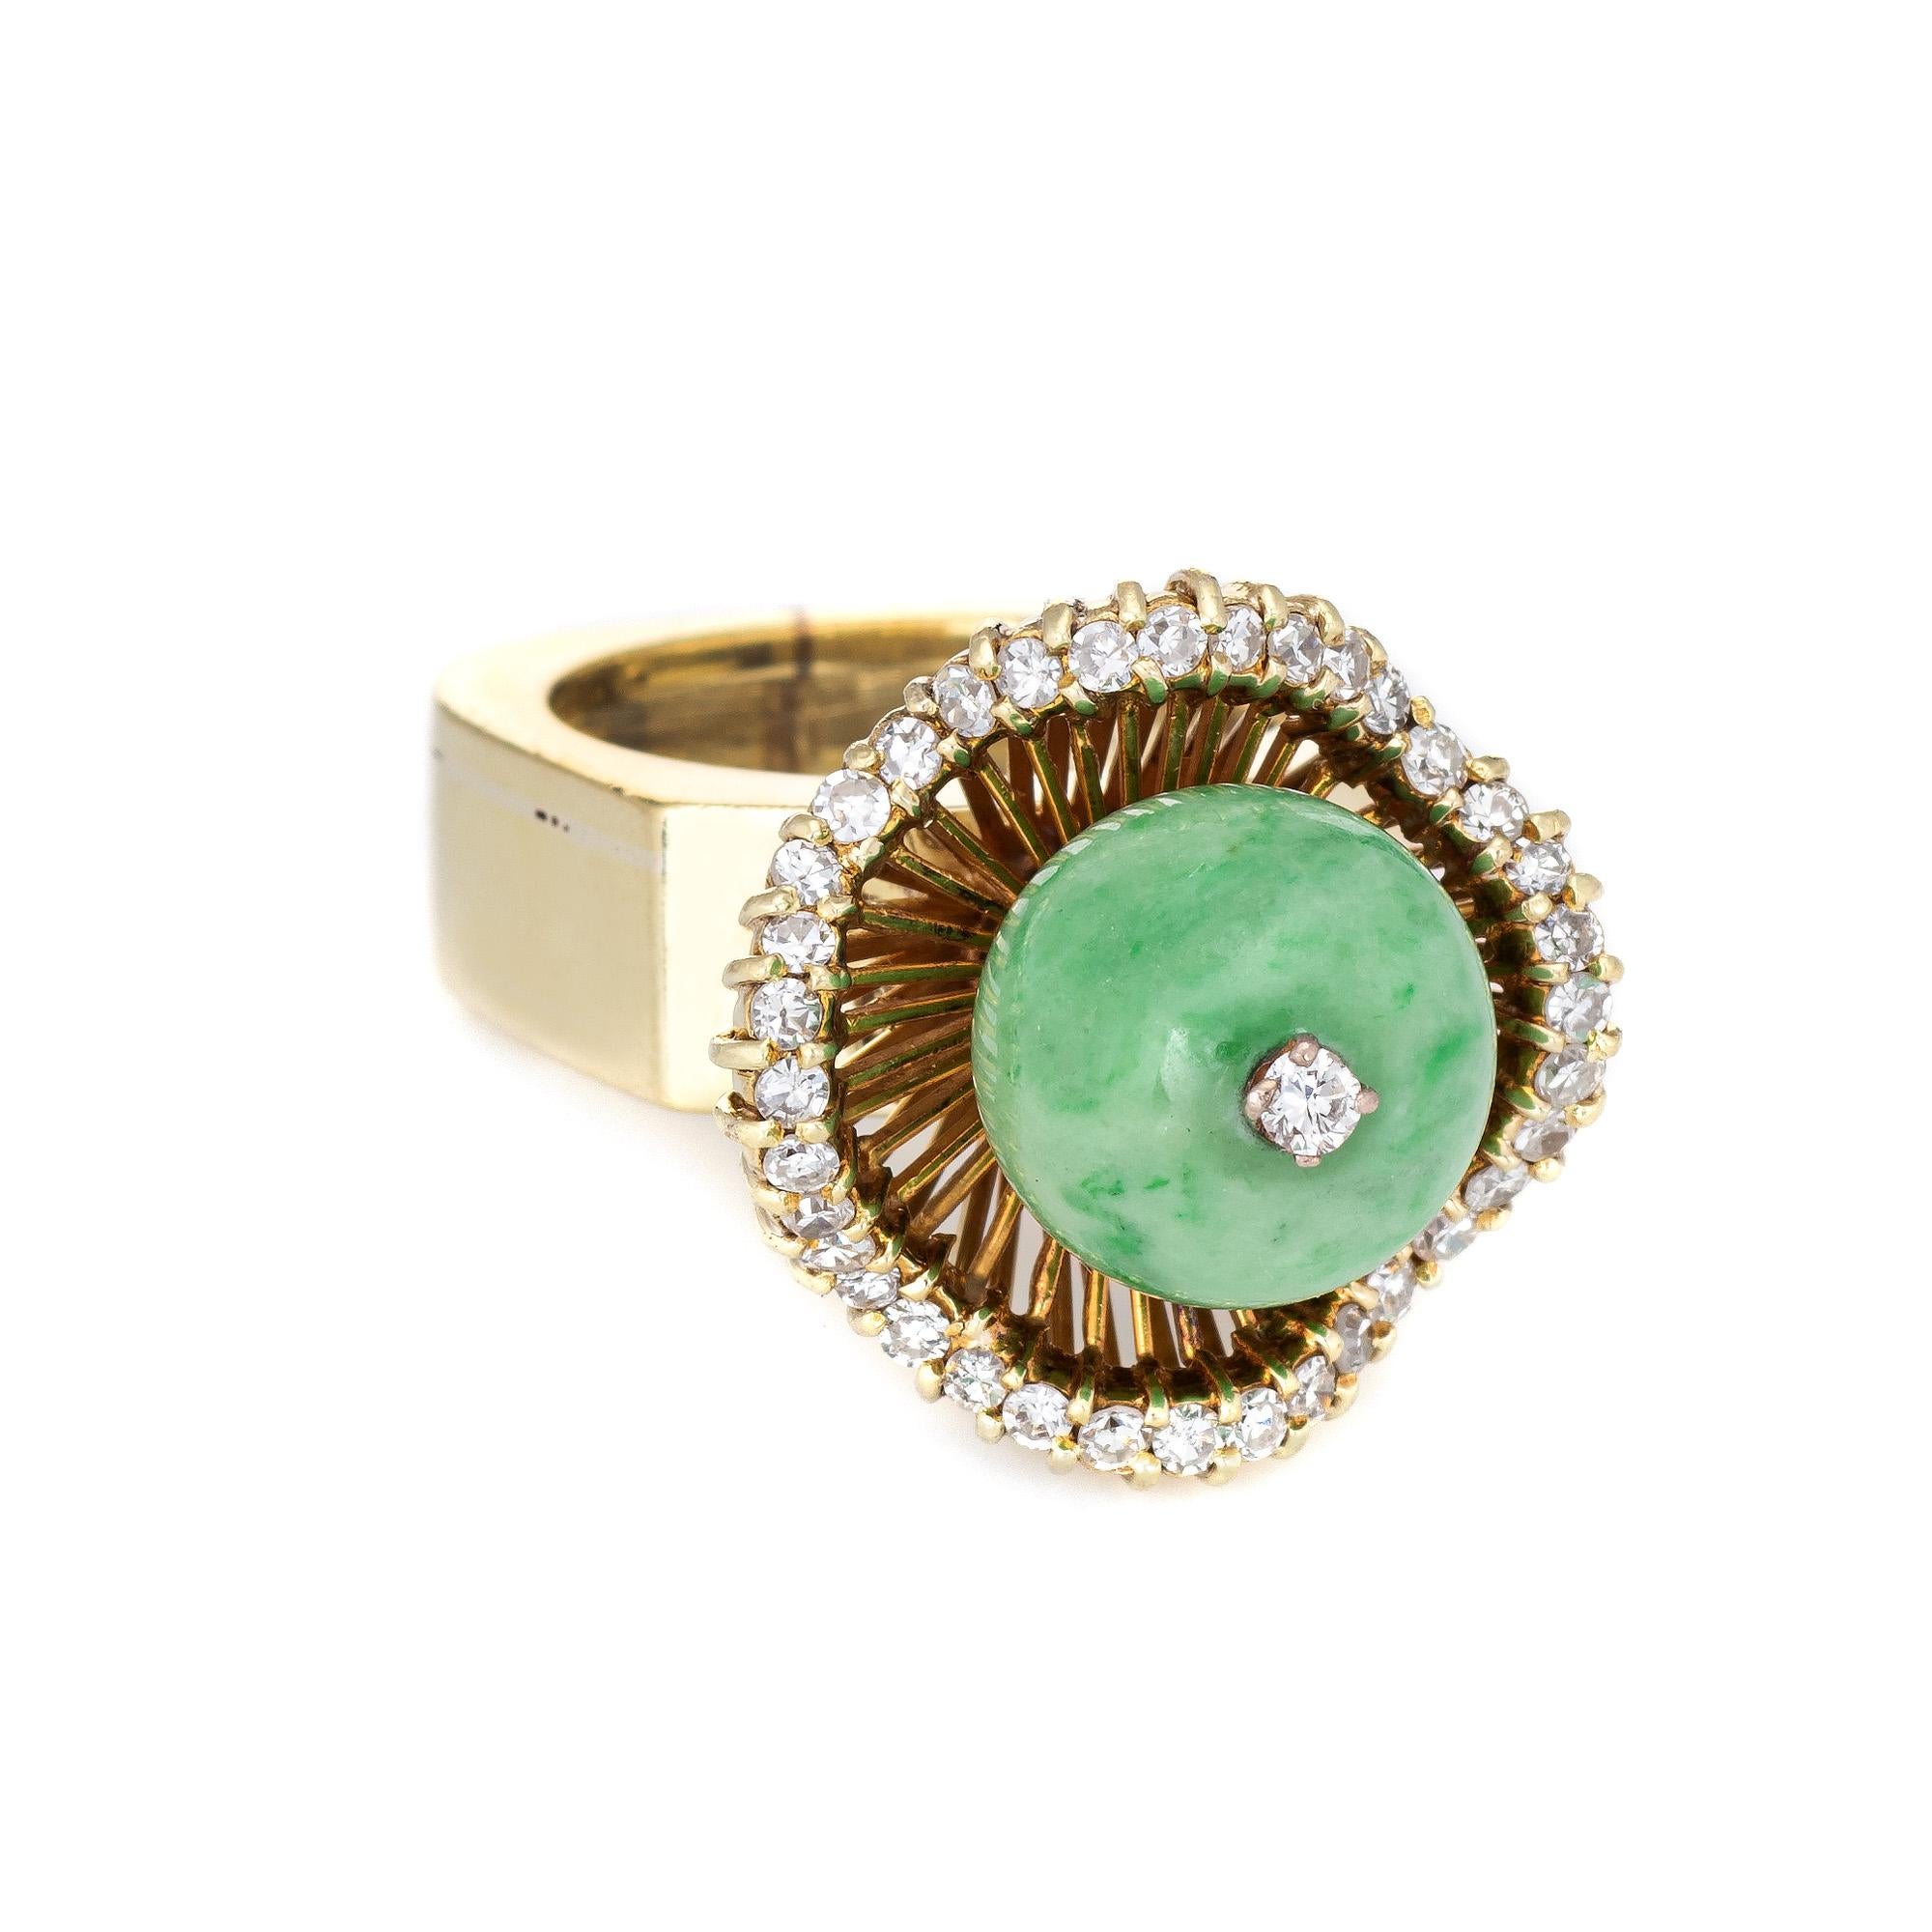 Stylish vintage jade & diamond cocktail ring (circa 1960s) crafted in 14 karat yellow gold. 

Jade measures 11.5mm, accented with an estimated 0.55 carats of diamonds (estimated at H-I color and VS2-SI1 clarity). The jade is in excellent condition